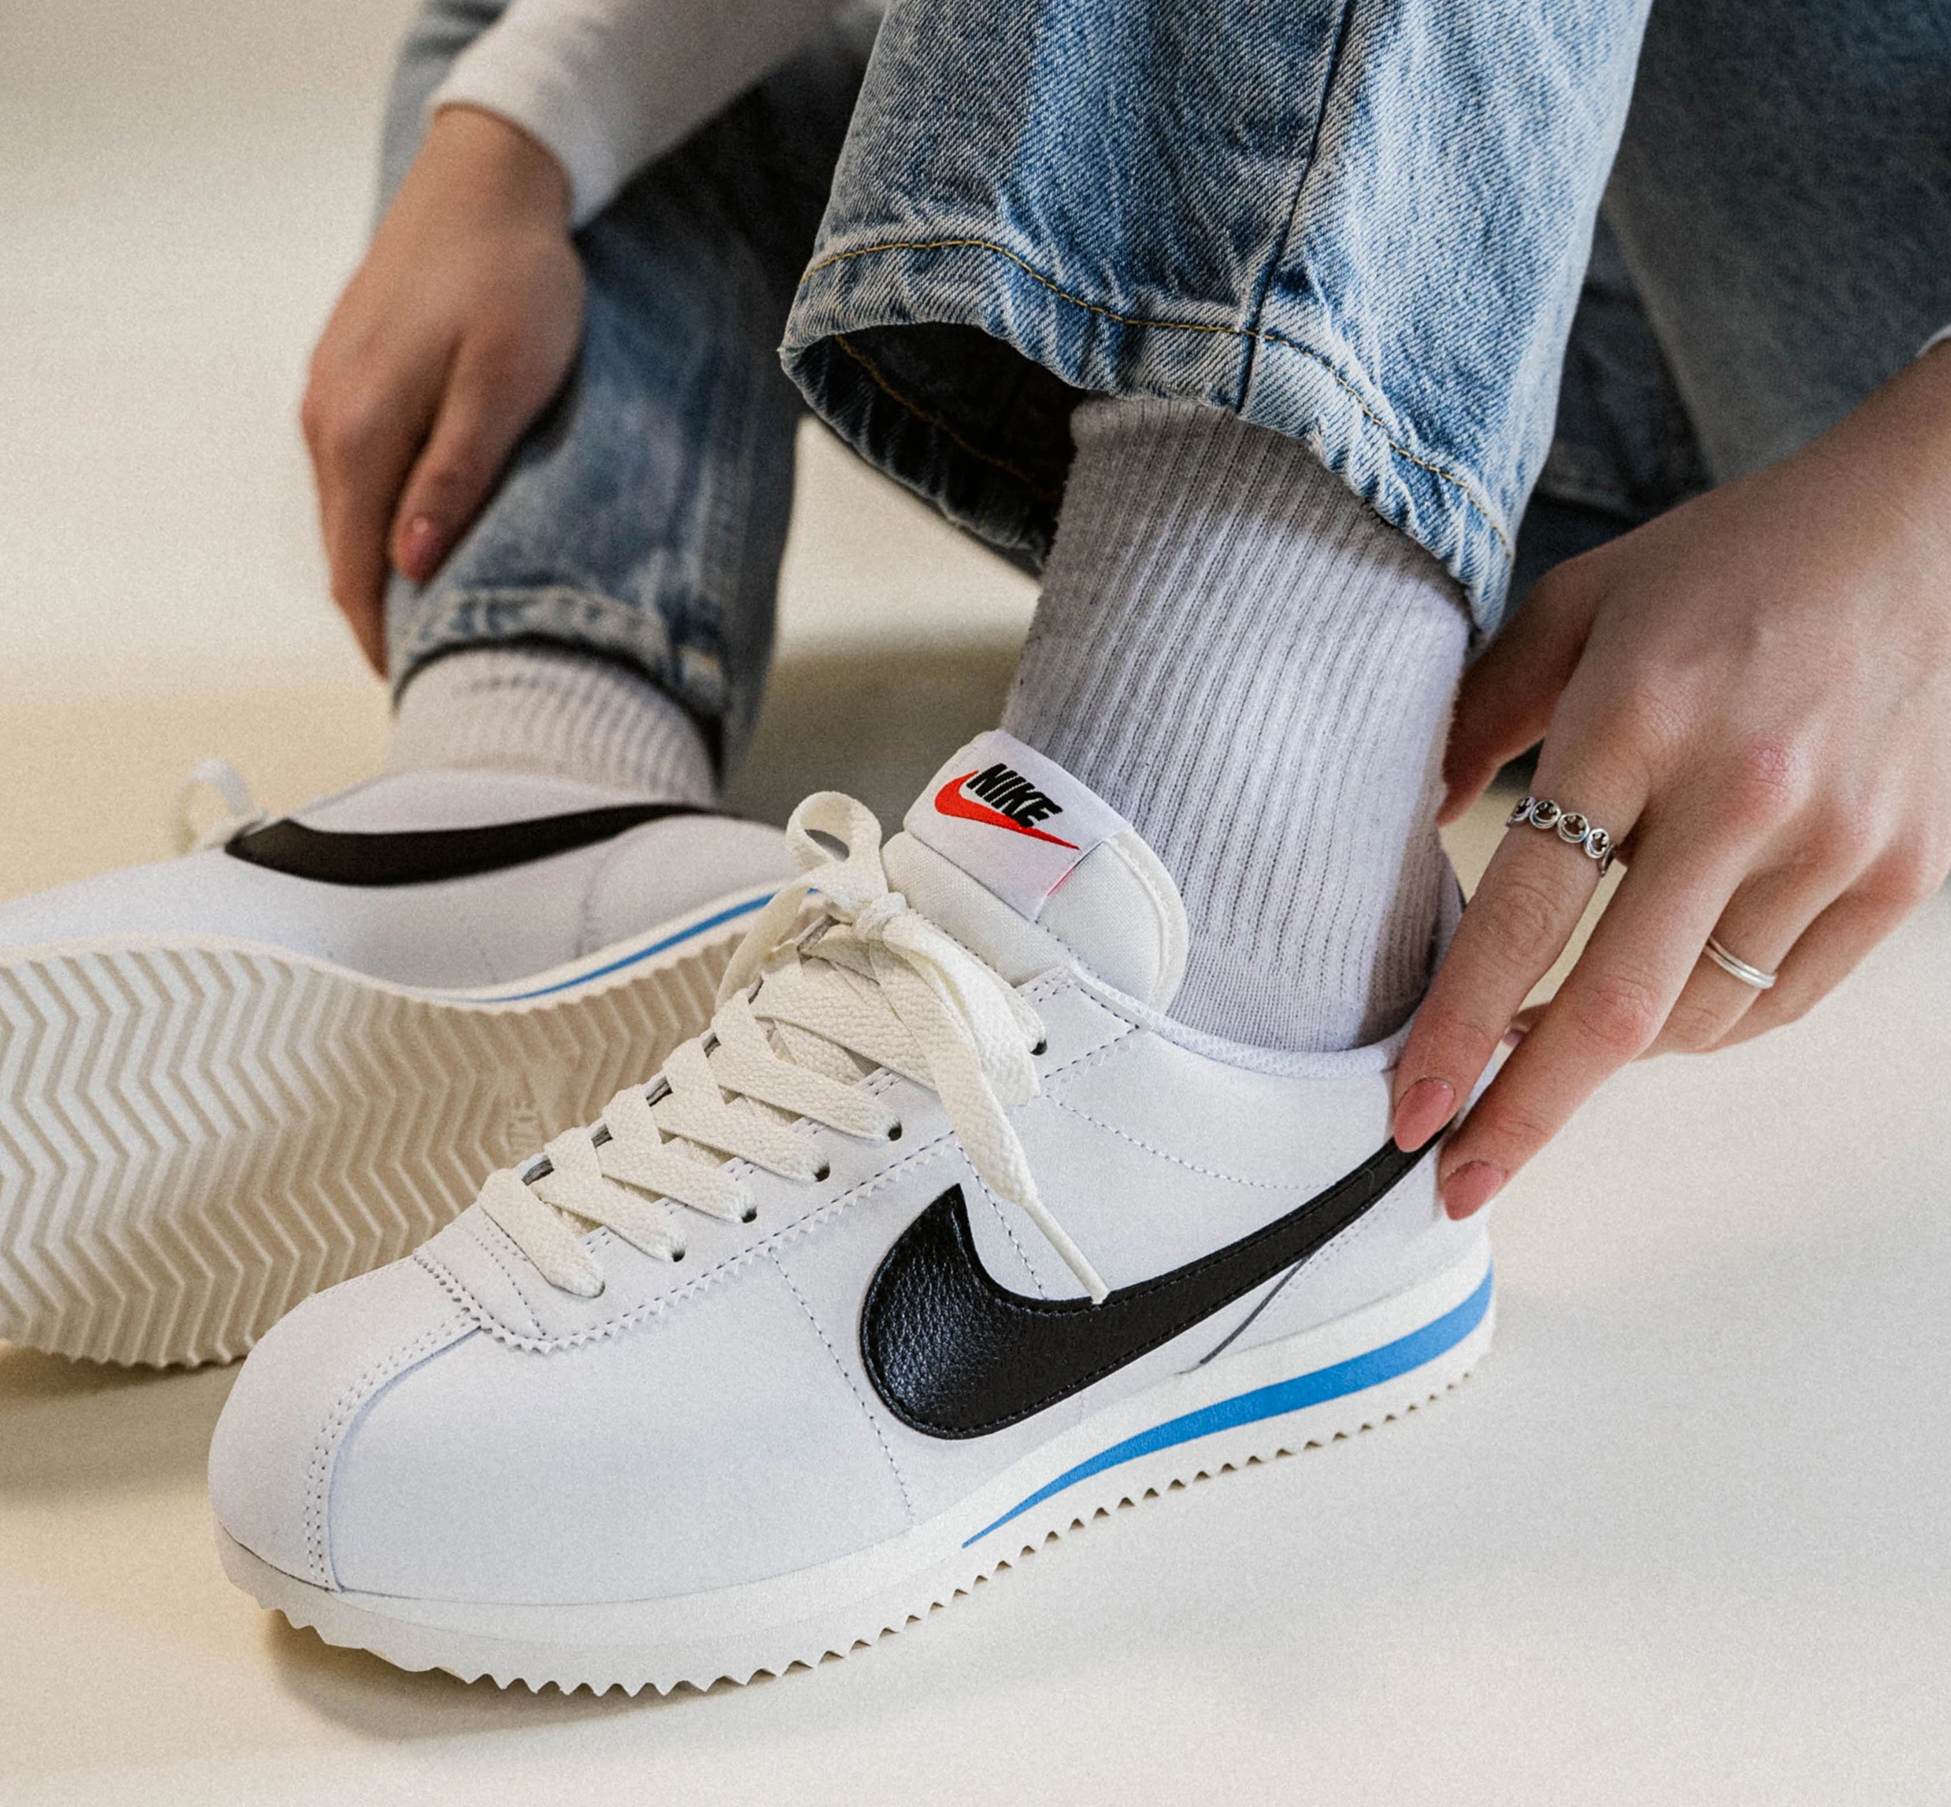 Nike Cortez 23 Premium Leather Women's Shoes. Nike IN